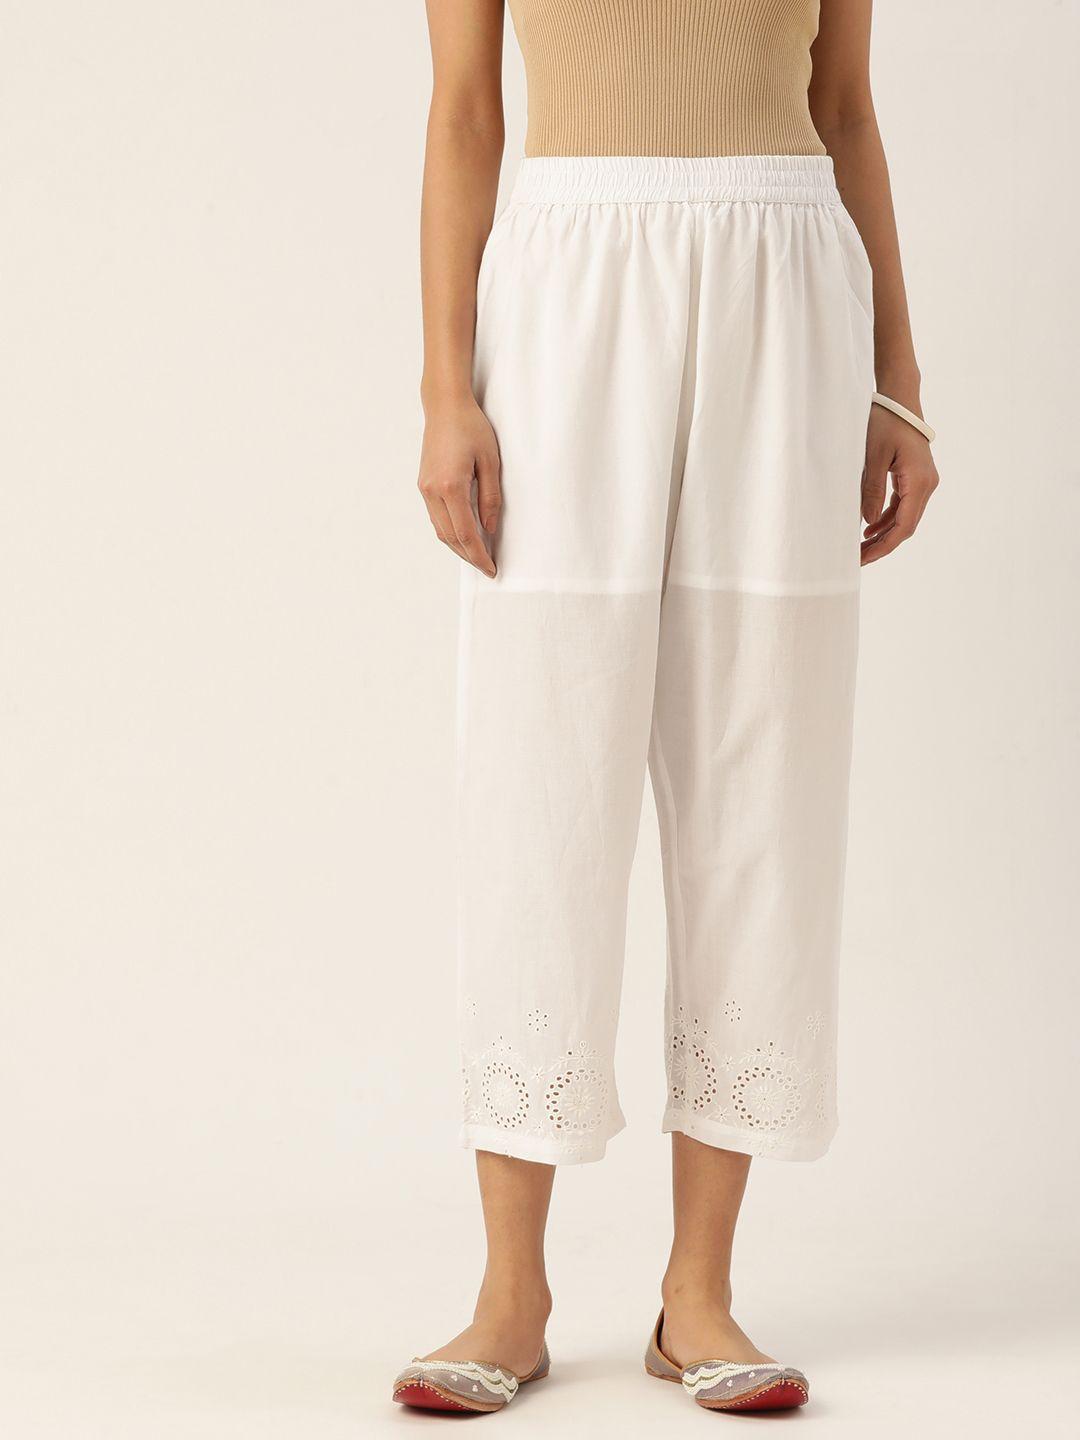 zizo-by-namrata-bajaj-women-floral-embroidered-pure-cotton-comfort-loose-fit-trousers